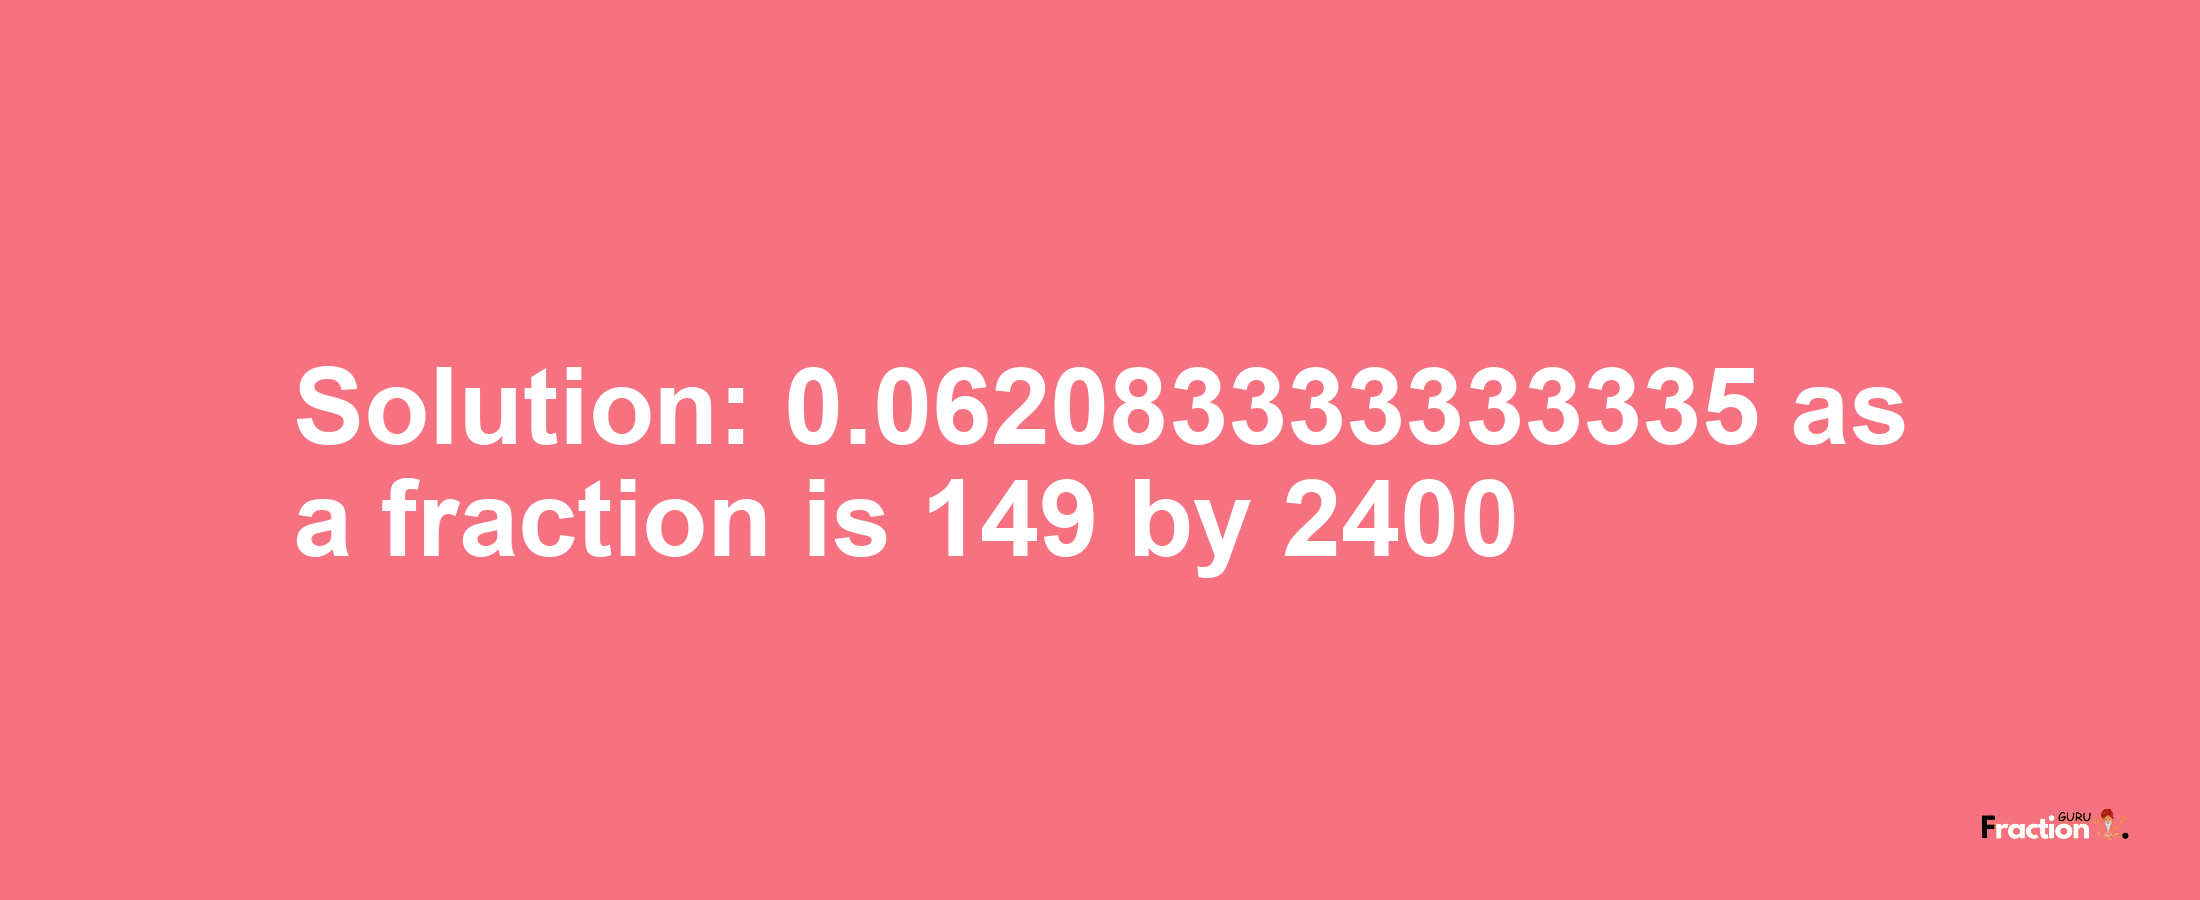 Solution:0.062083333333335 as a fraction is 149/2400